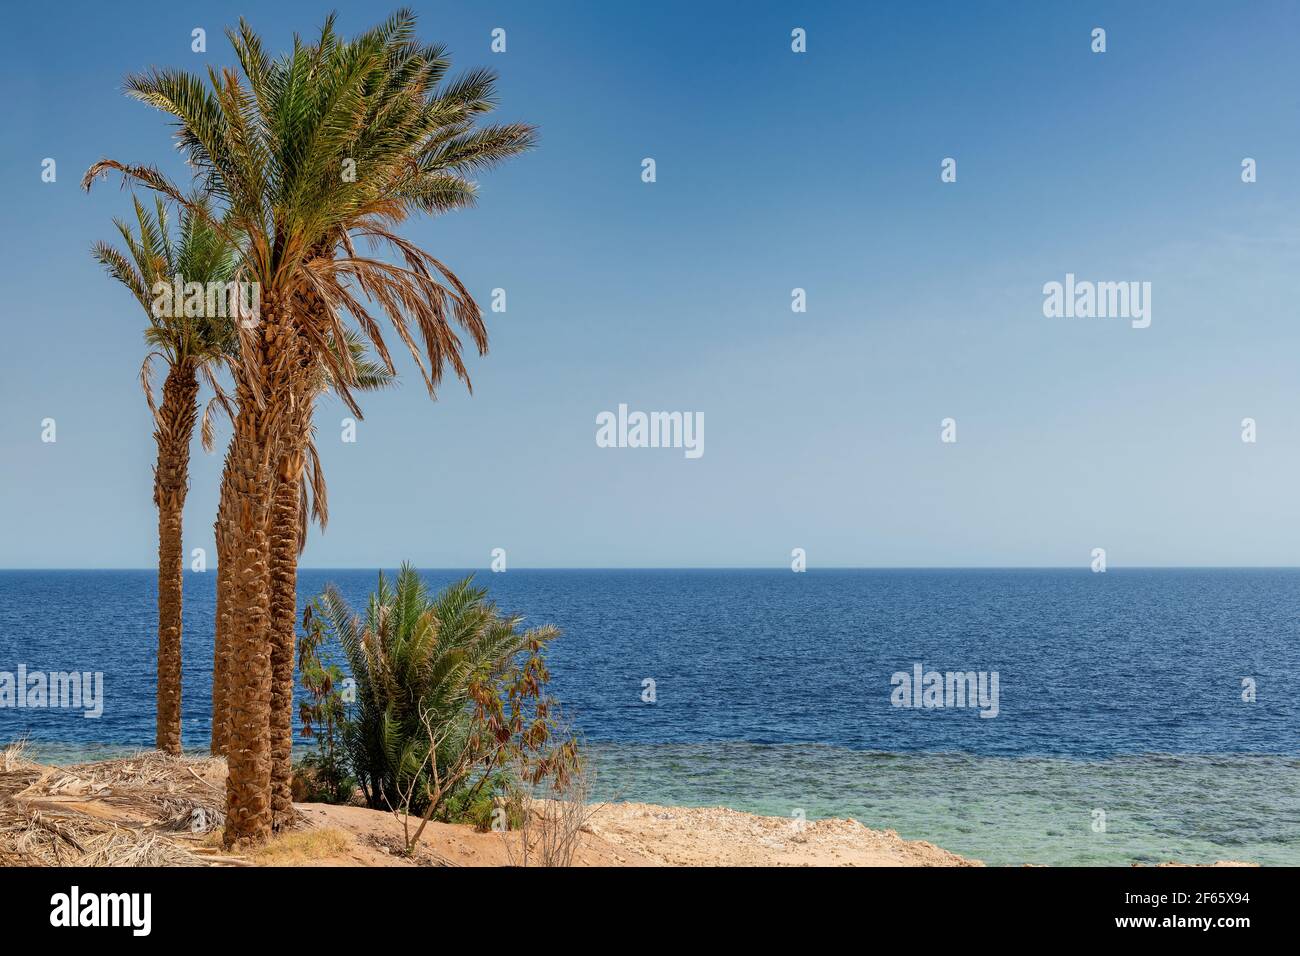 Paradise beach. Sunny beach with palm and turquoise sea. Stock Photo